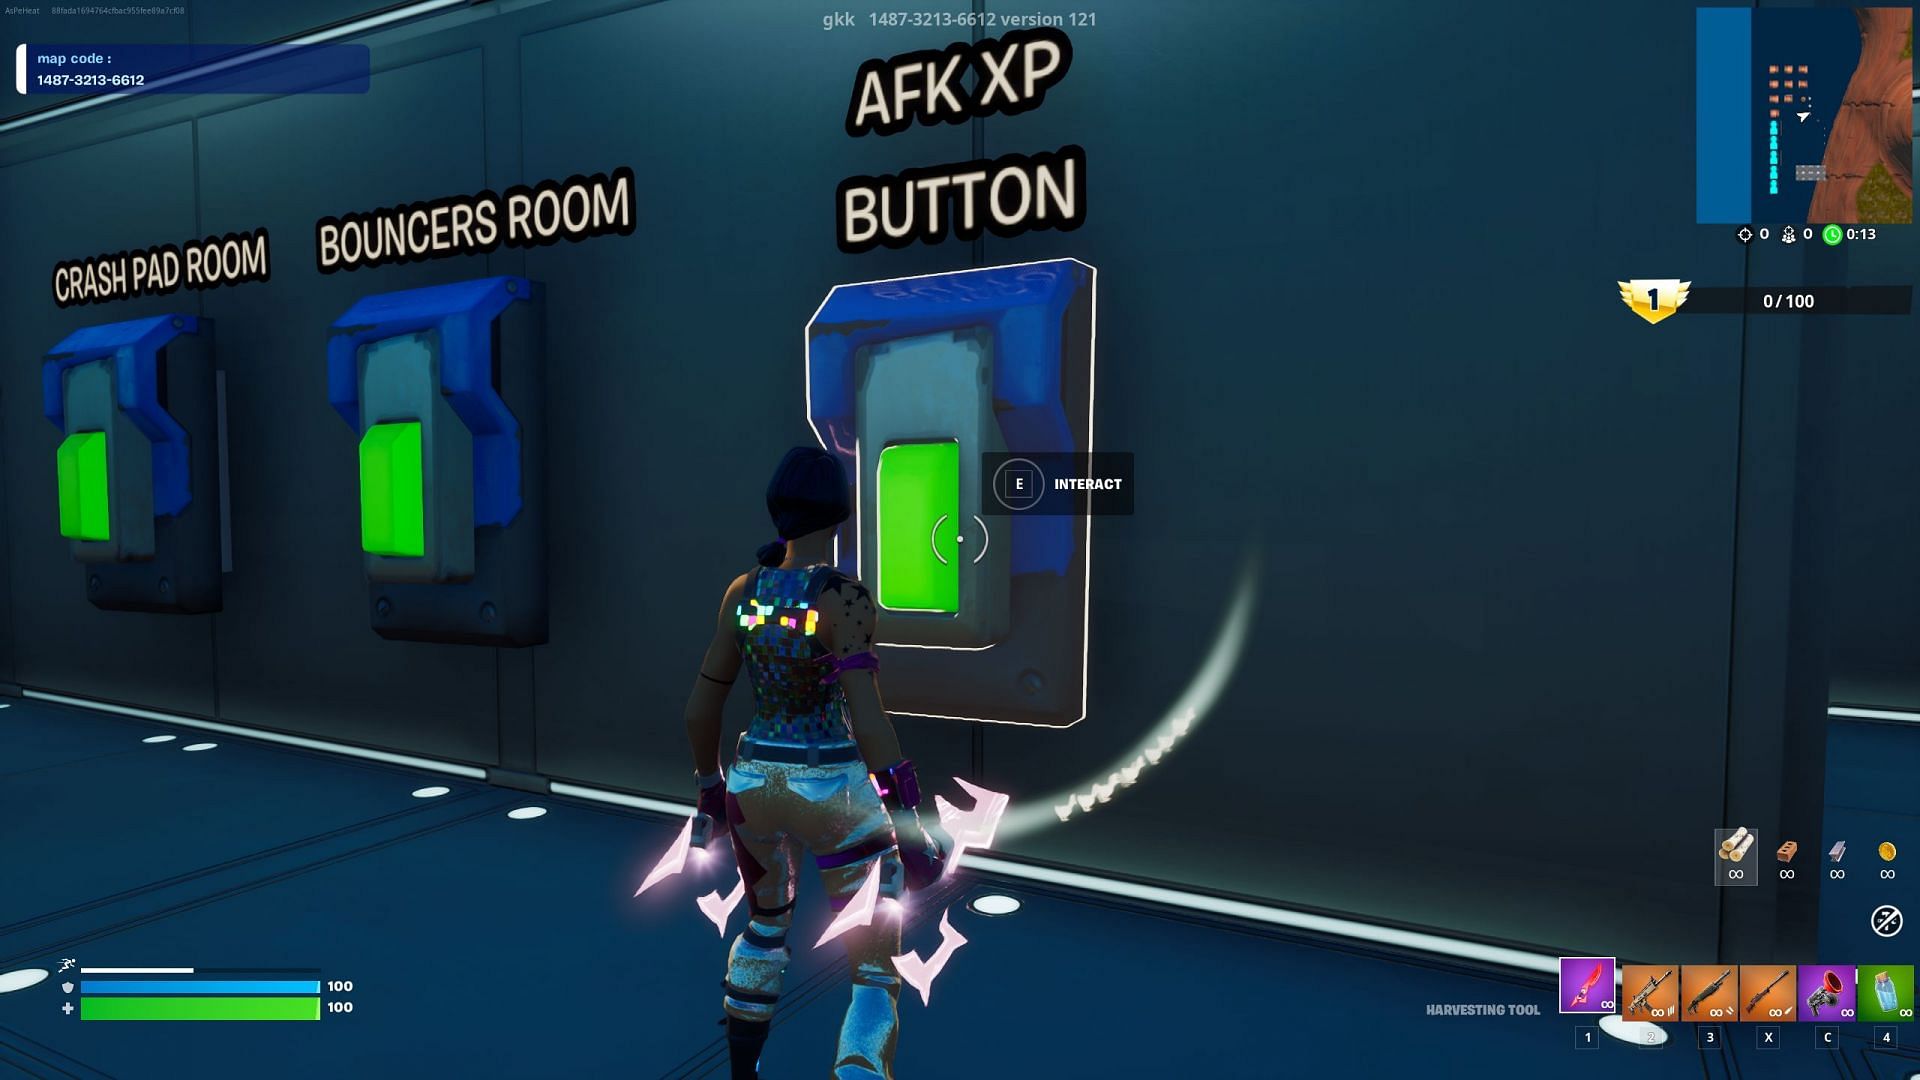 You will easily unlock the free outfit by interacting with the AFK XP button (Image via Epic Games)